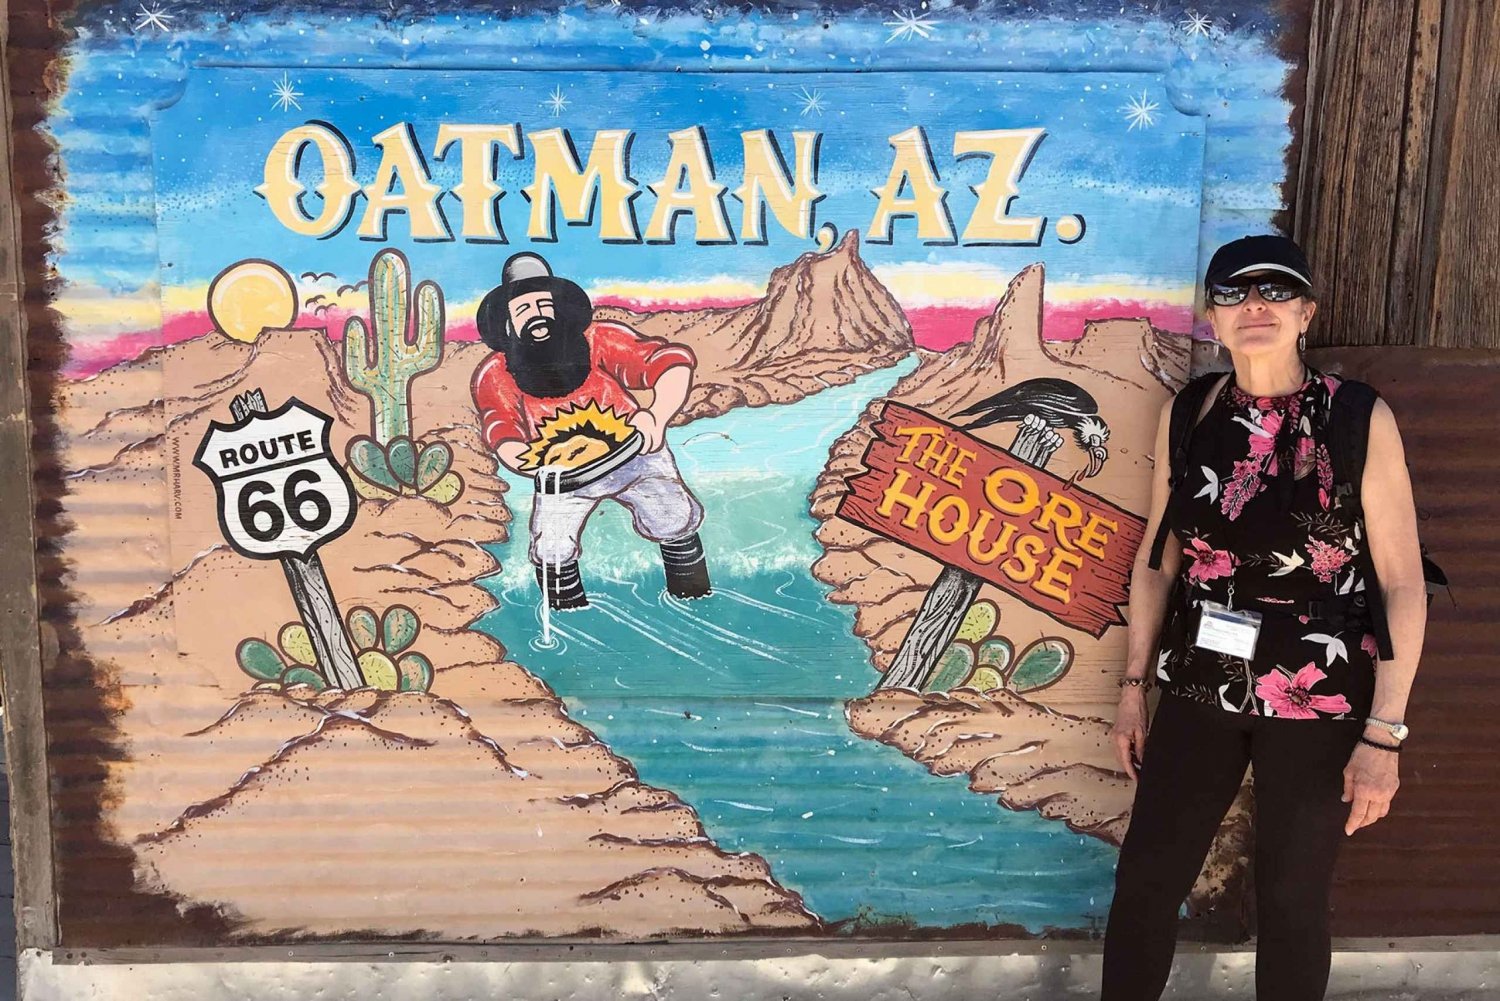 Oatman Mining Town/Burros and Route 66 Tour